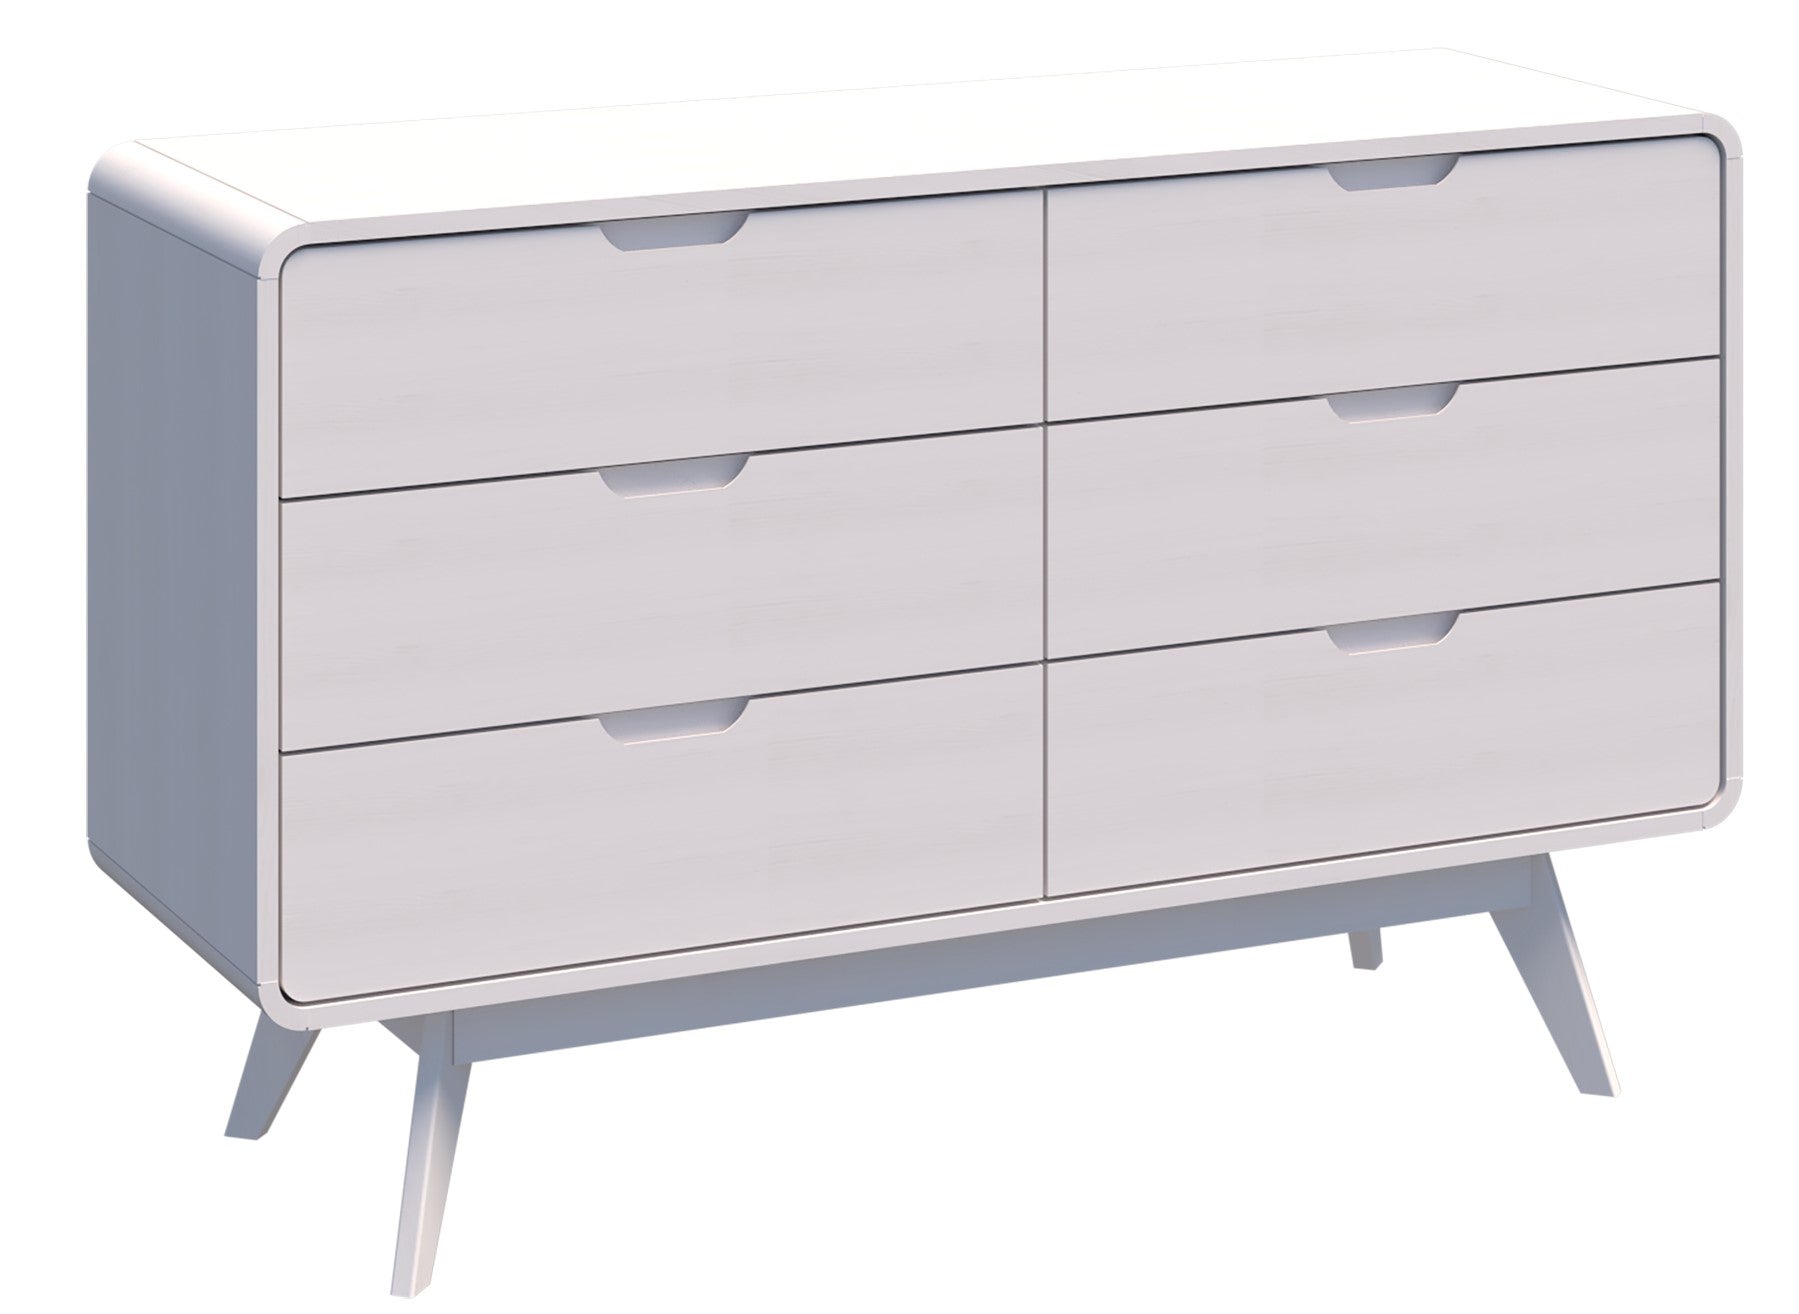 Lowboy - 6 Drawer - ON SALE - 28% OFF - Now $199 - 3 left in stock